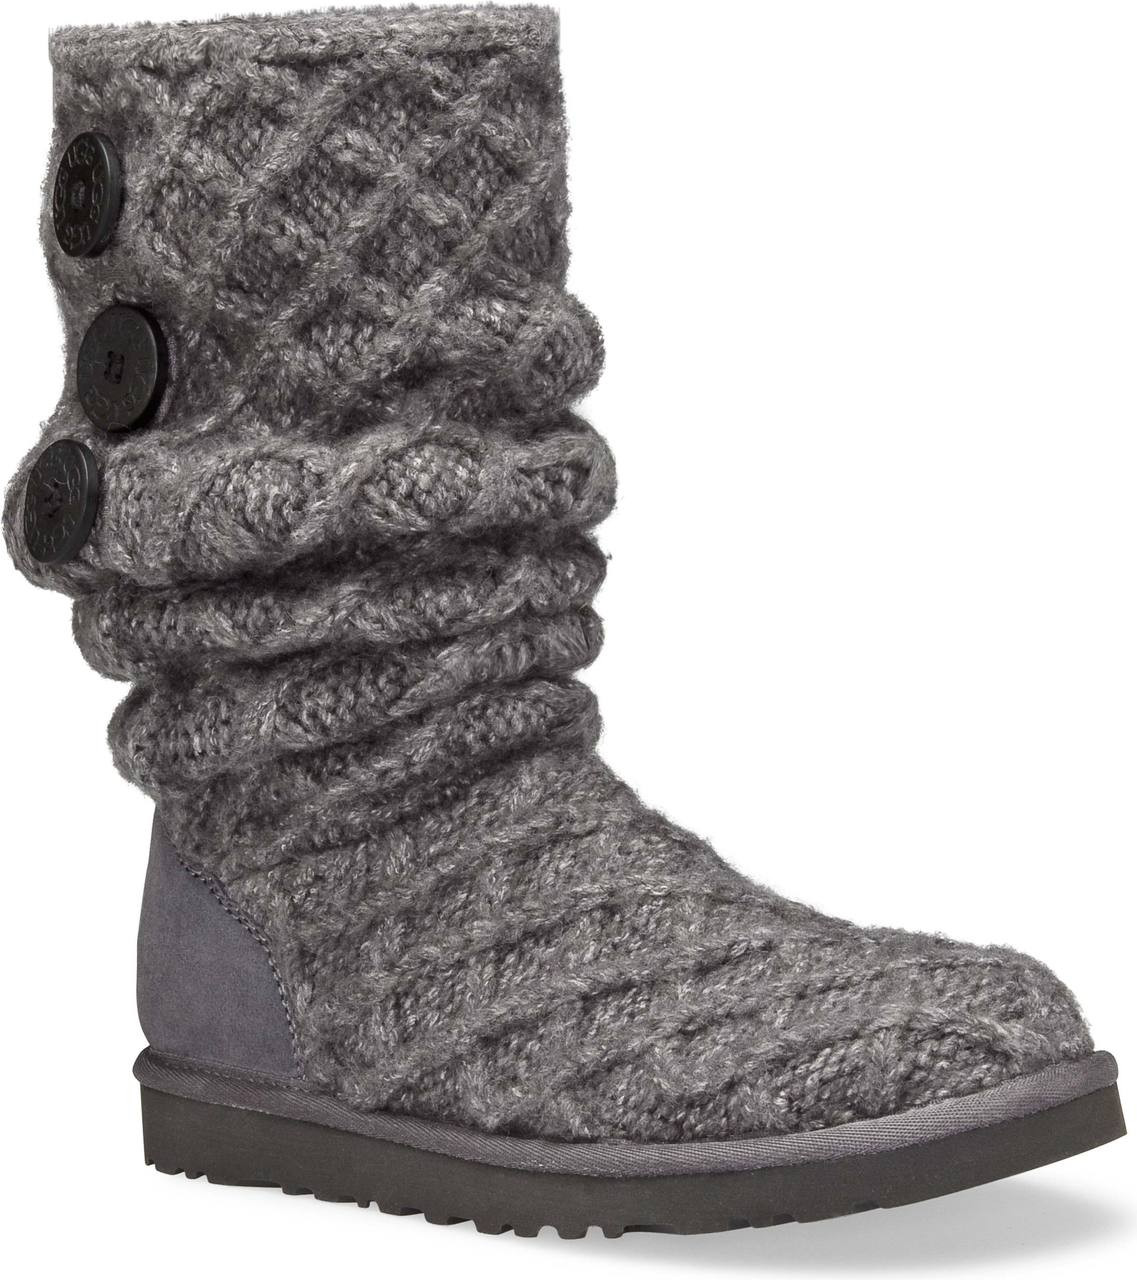 ugg sweater boots